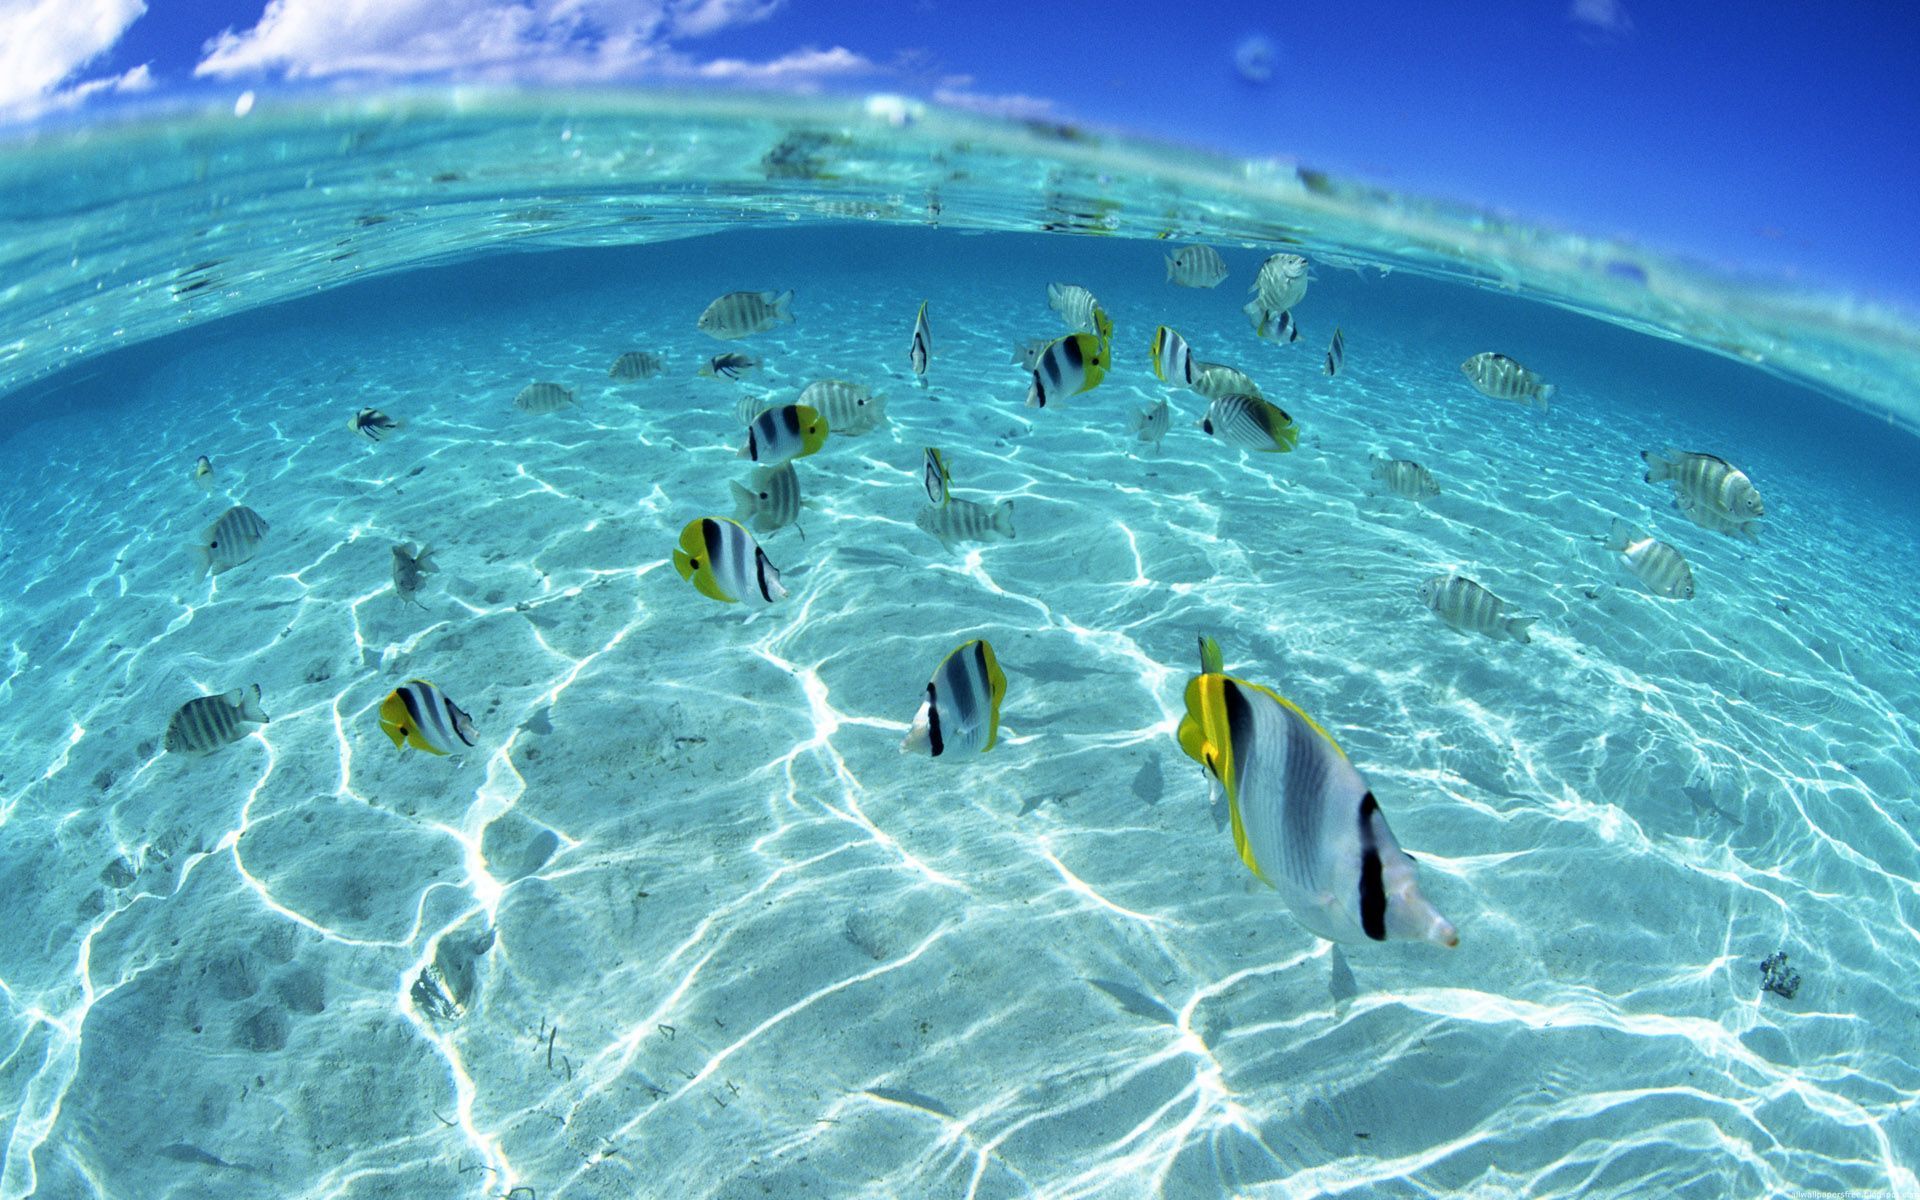 Fish in a shallow sea